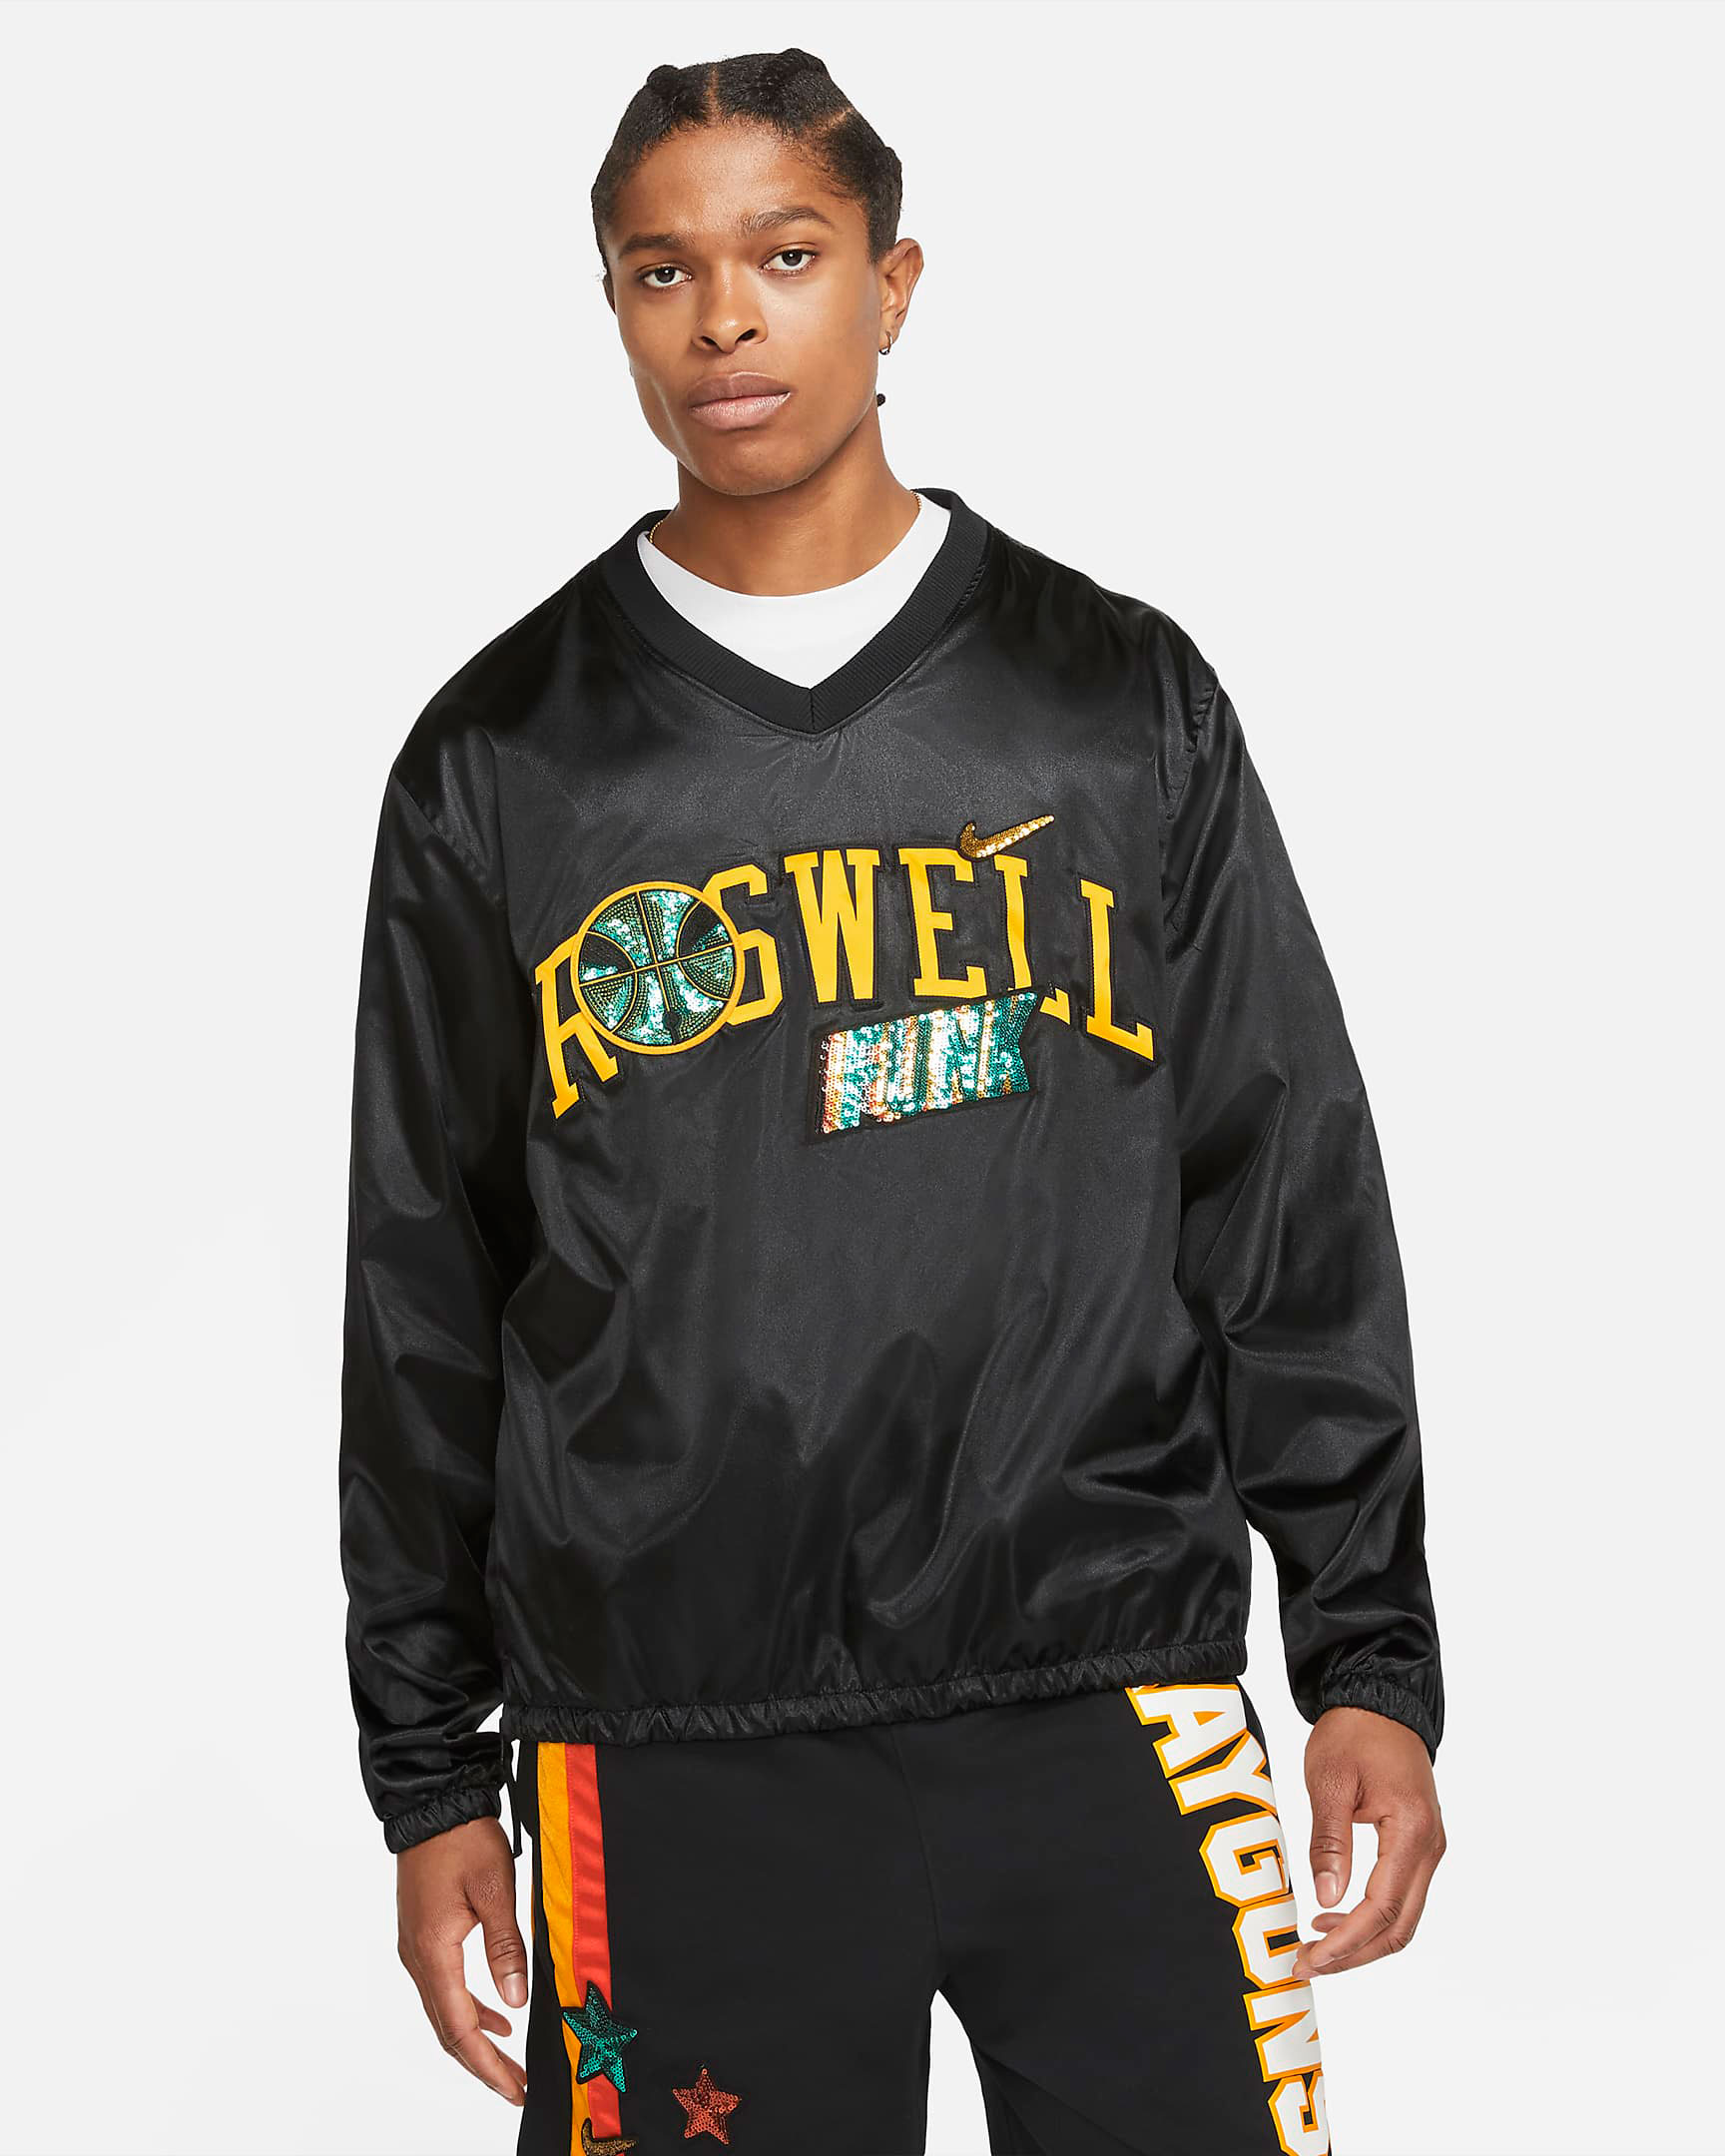 Nike Roswell Rayguns Jersey — MAJOR